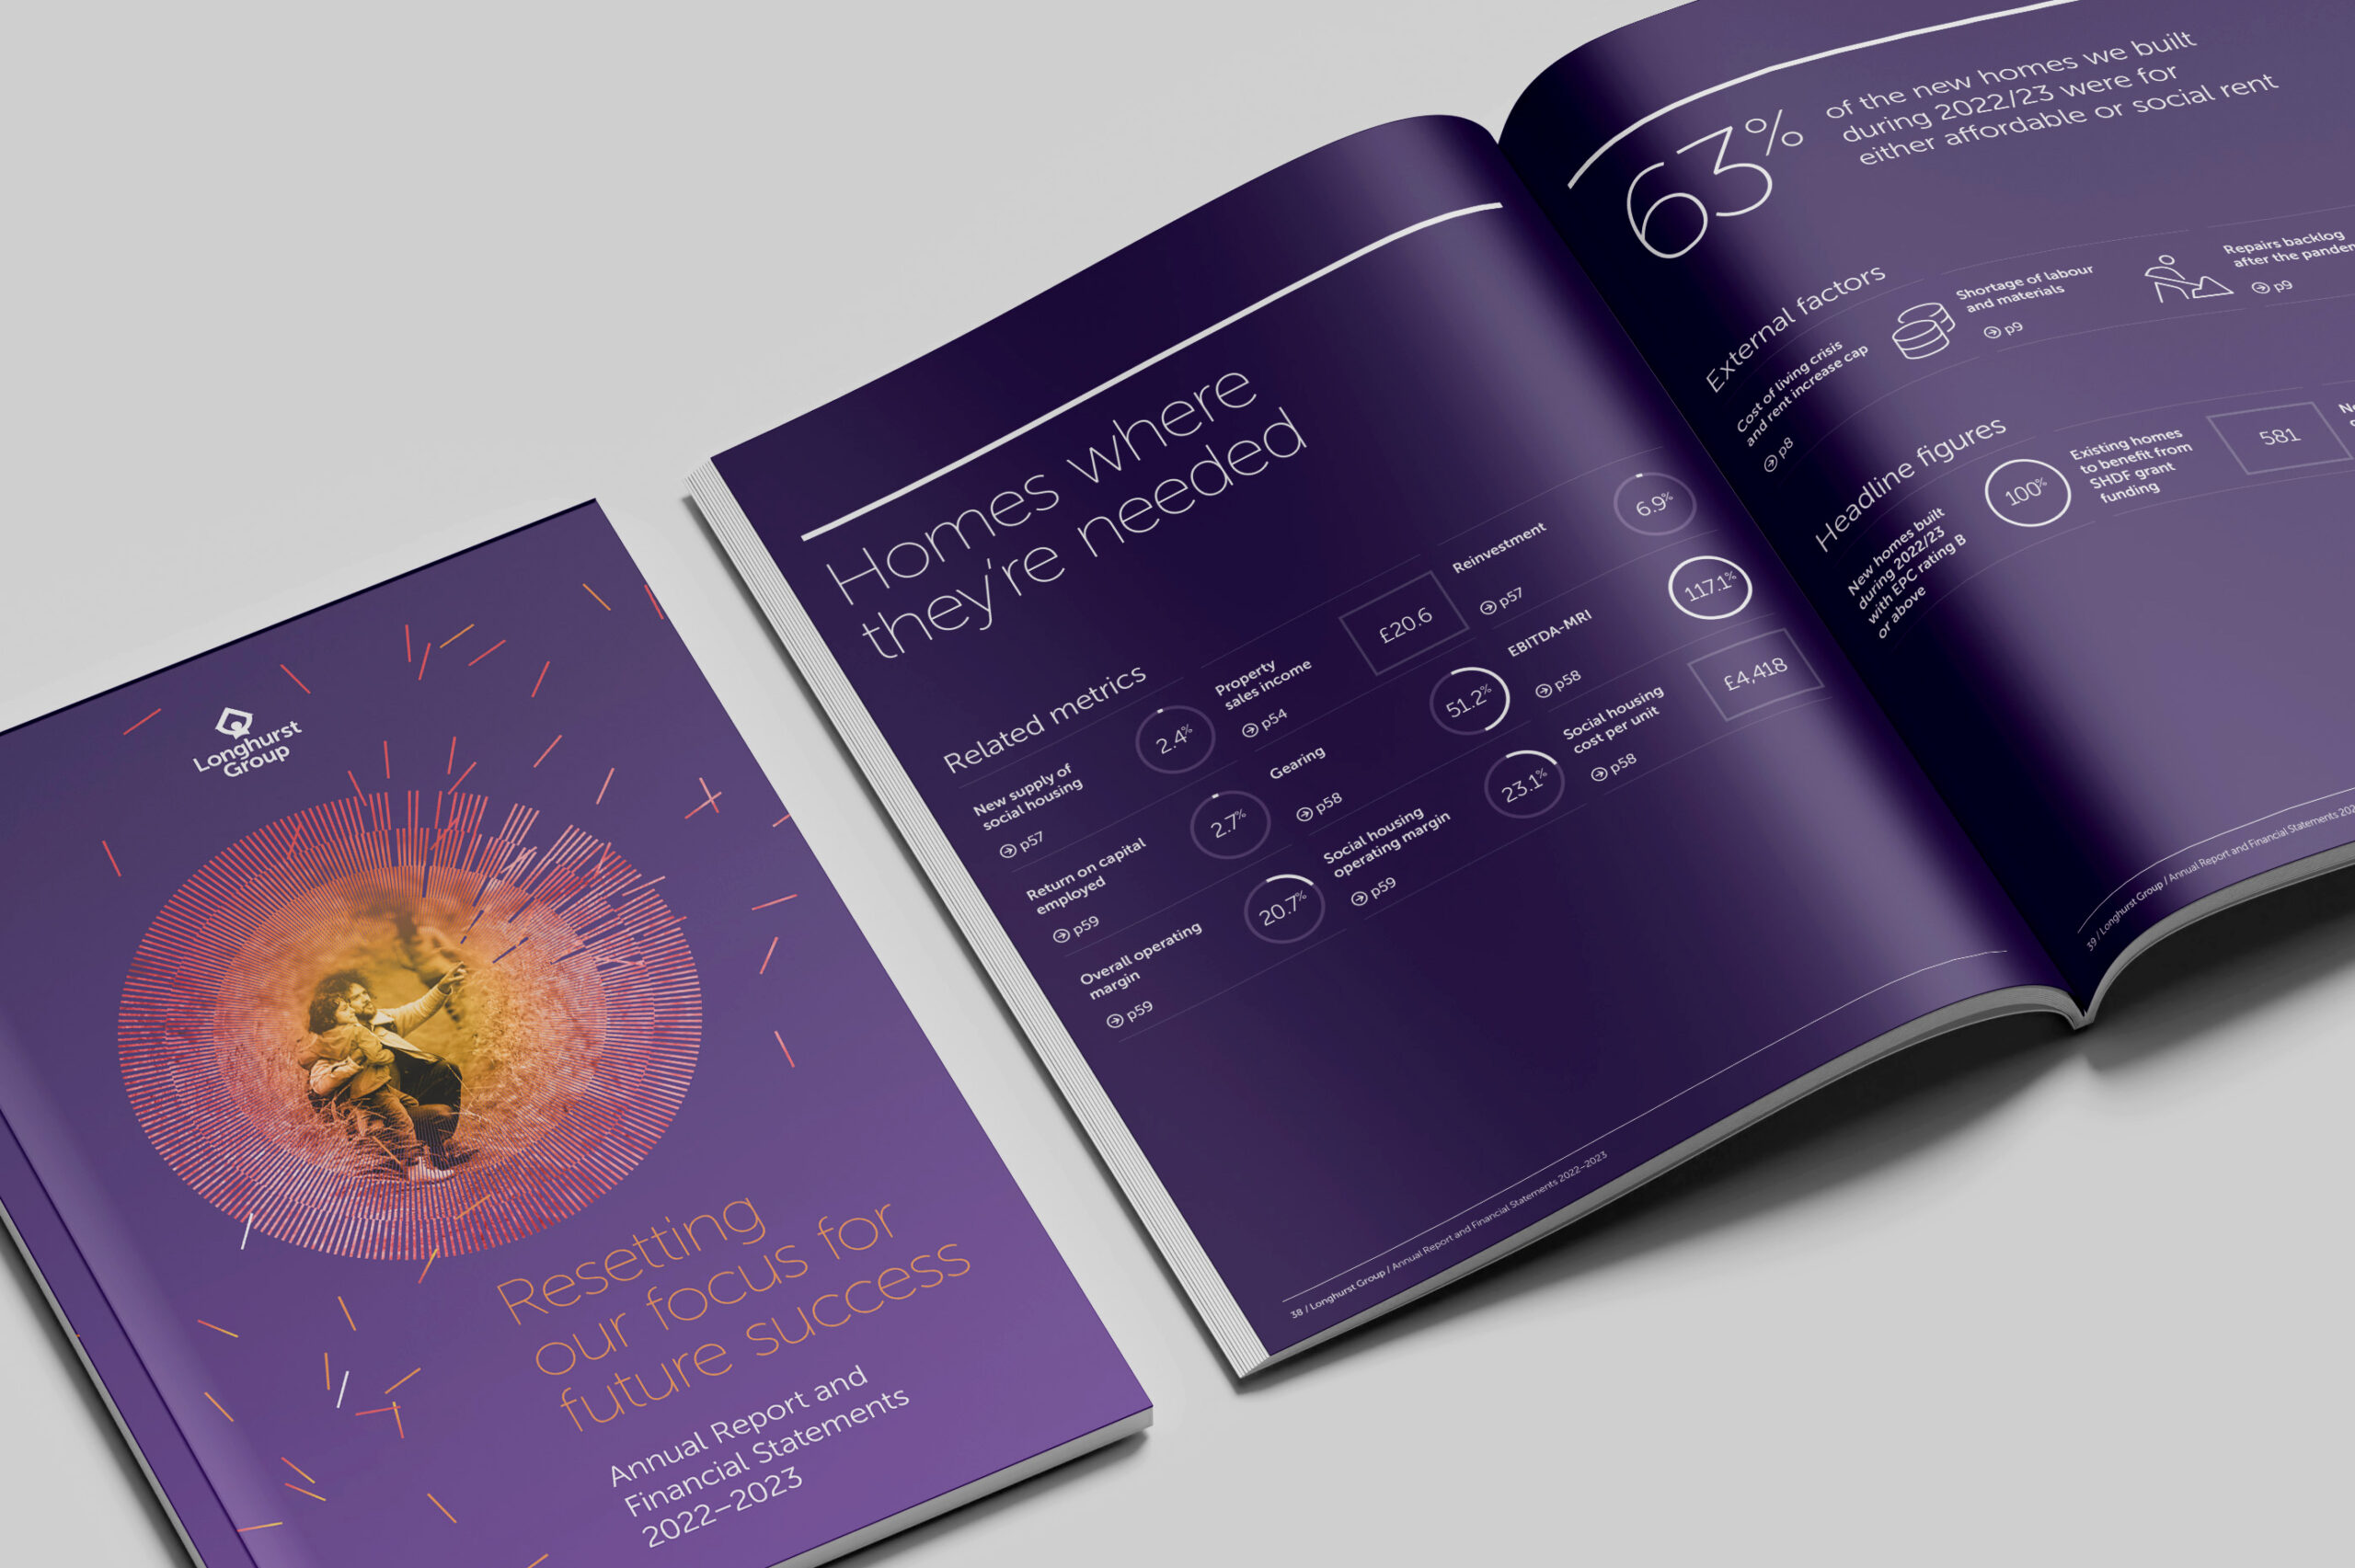 Image of front cover and sample spread from  print version of Longhurst Group's 2022/23 Annual Report. The cover shows a father and daughter image placed within a stylised dandelion with seeds drifting around. The sample spread shows large charts and numbers on a dark purple background.